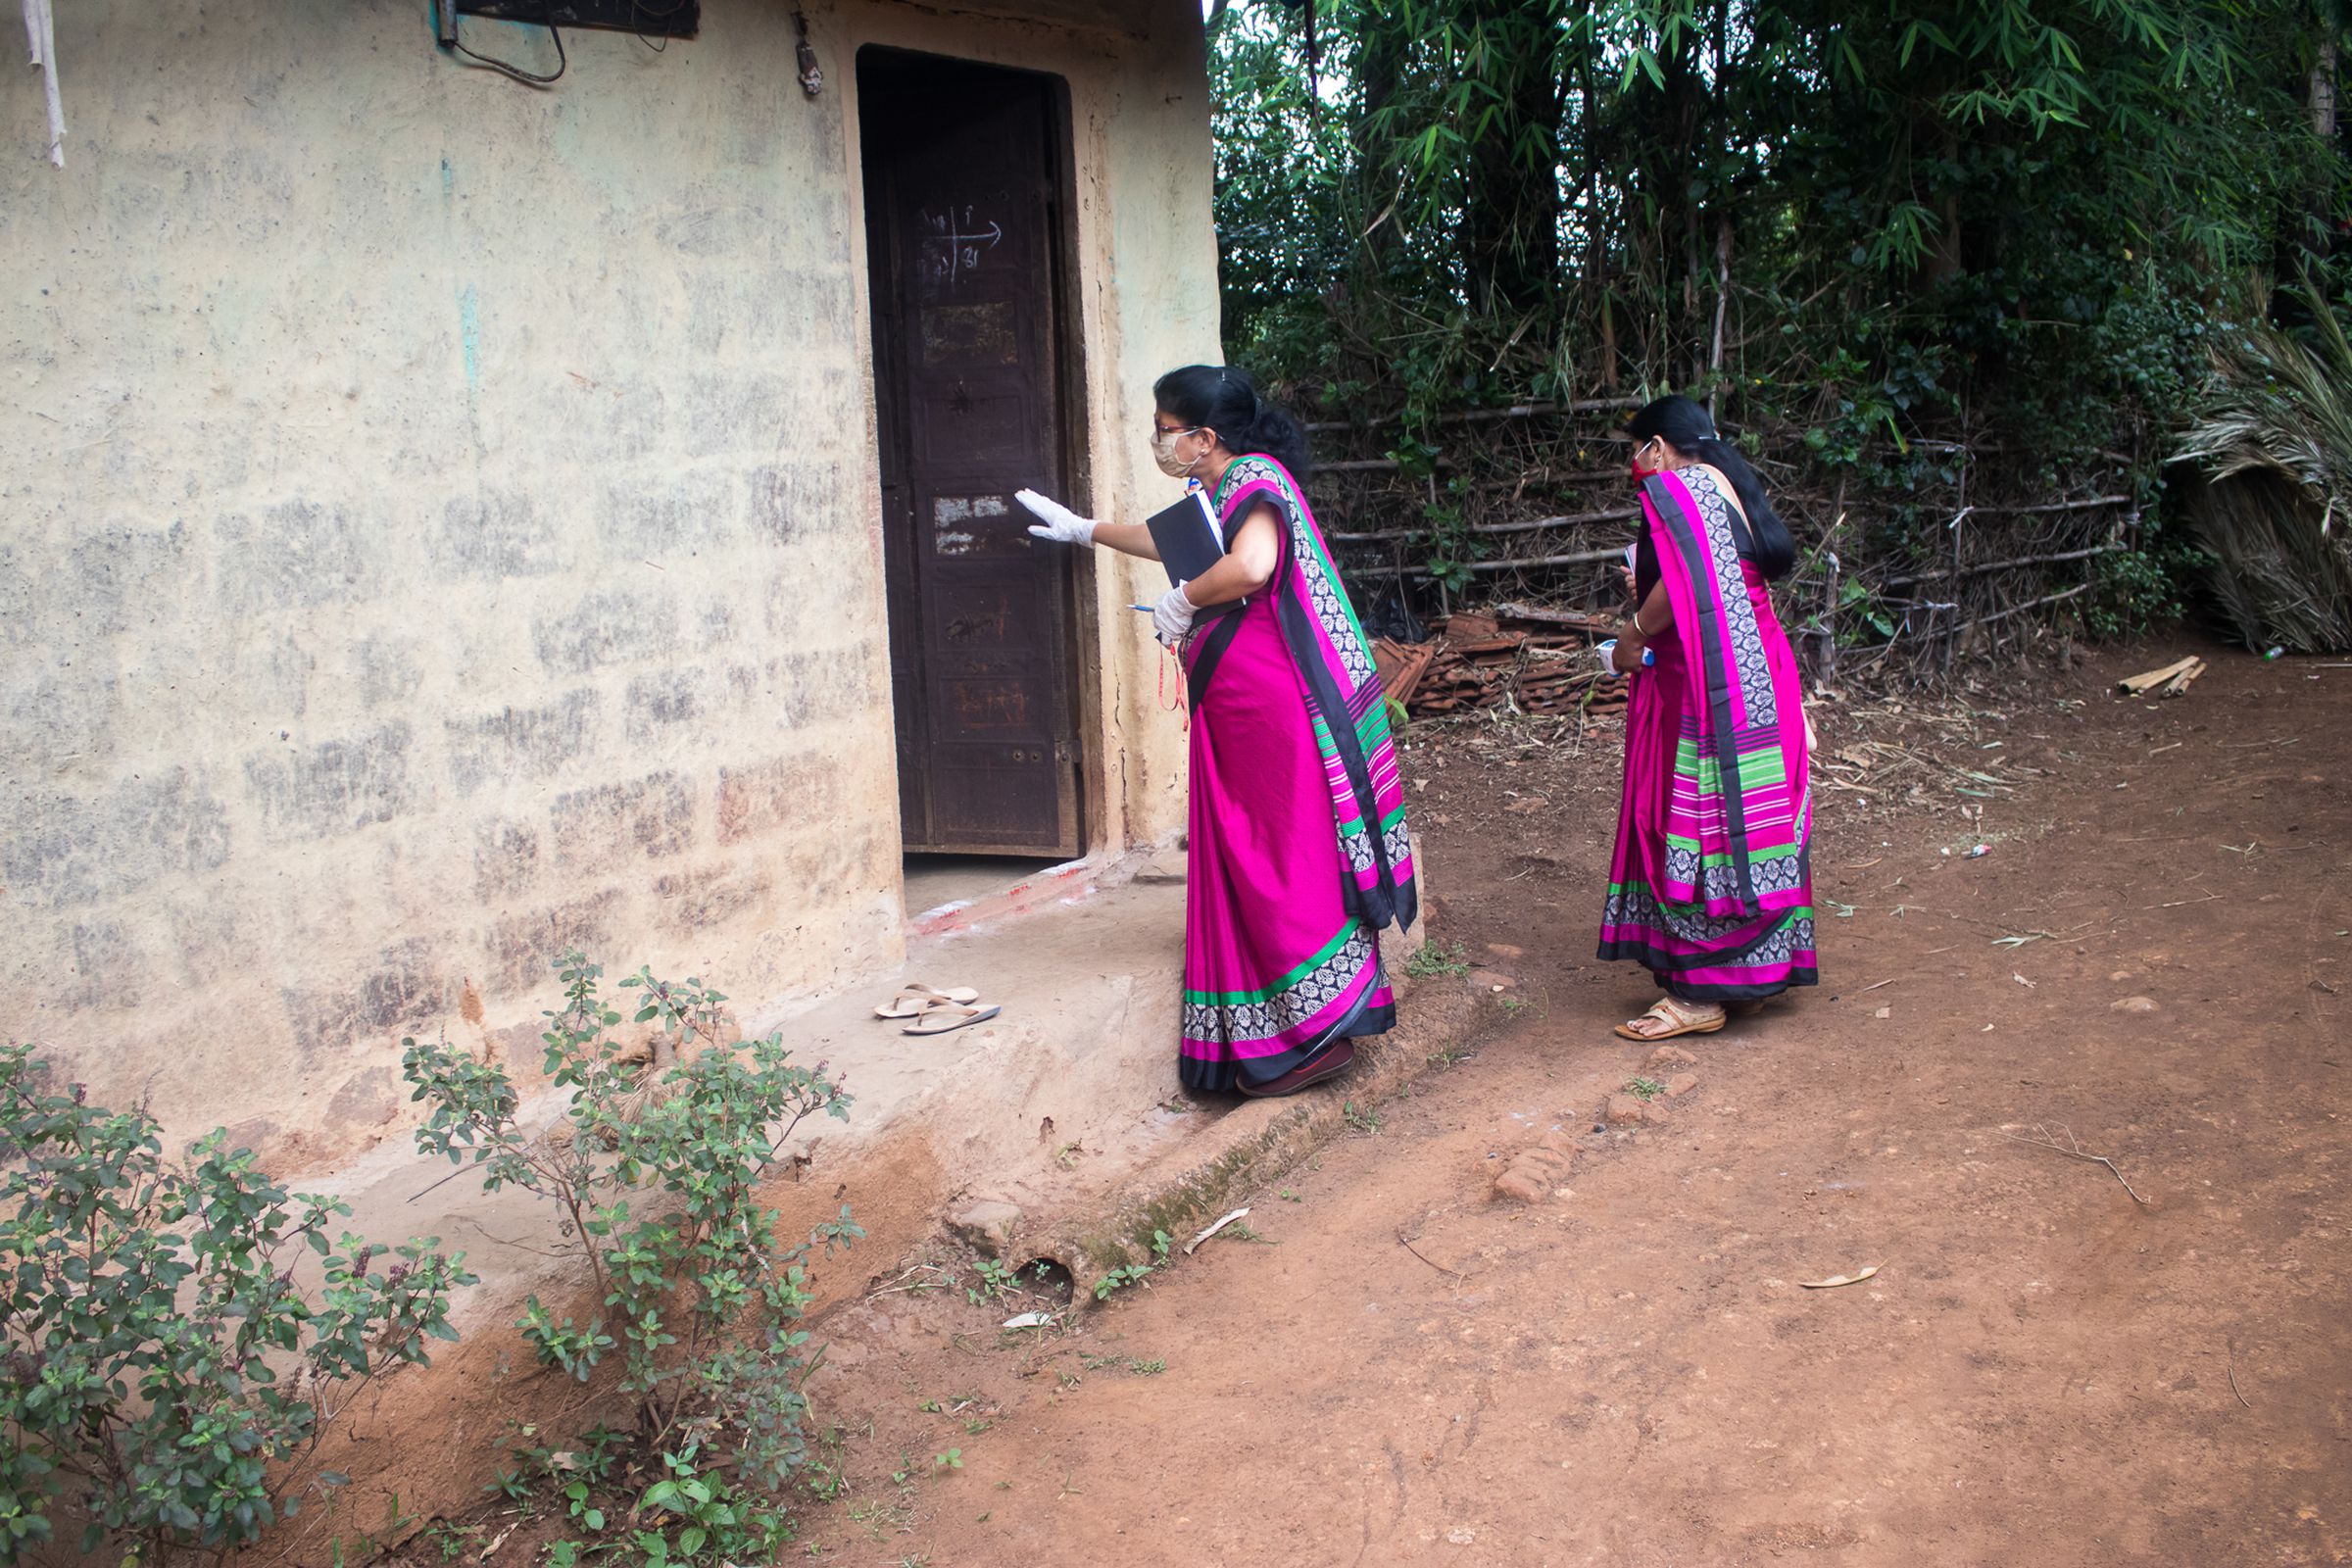 Several people from remote villages fear vaccination because of rampant misinformation. Often, people hide in their houses or run away when ASHA workers are out surveying the community.